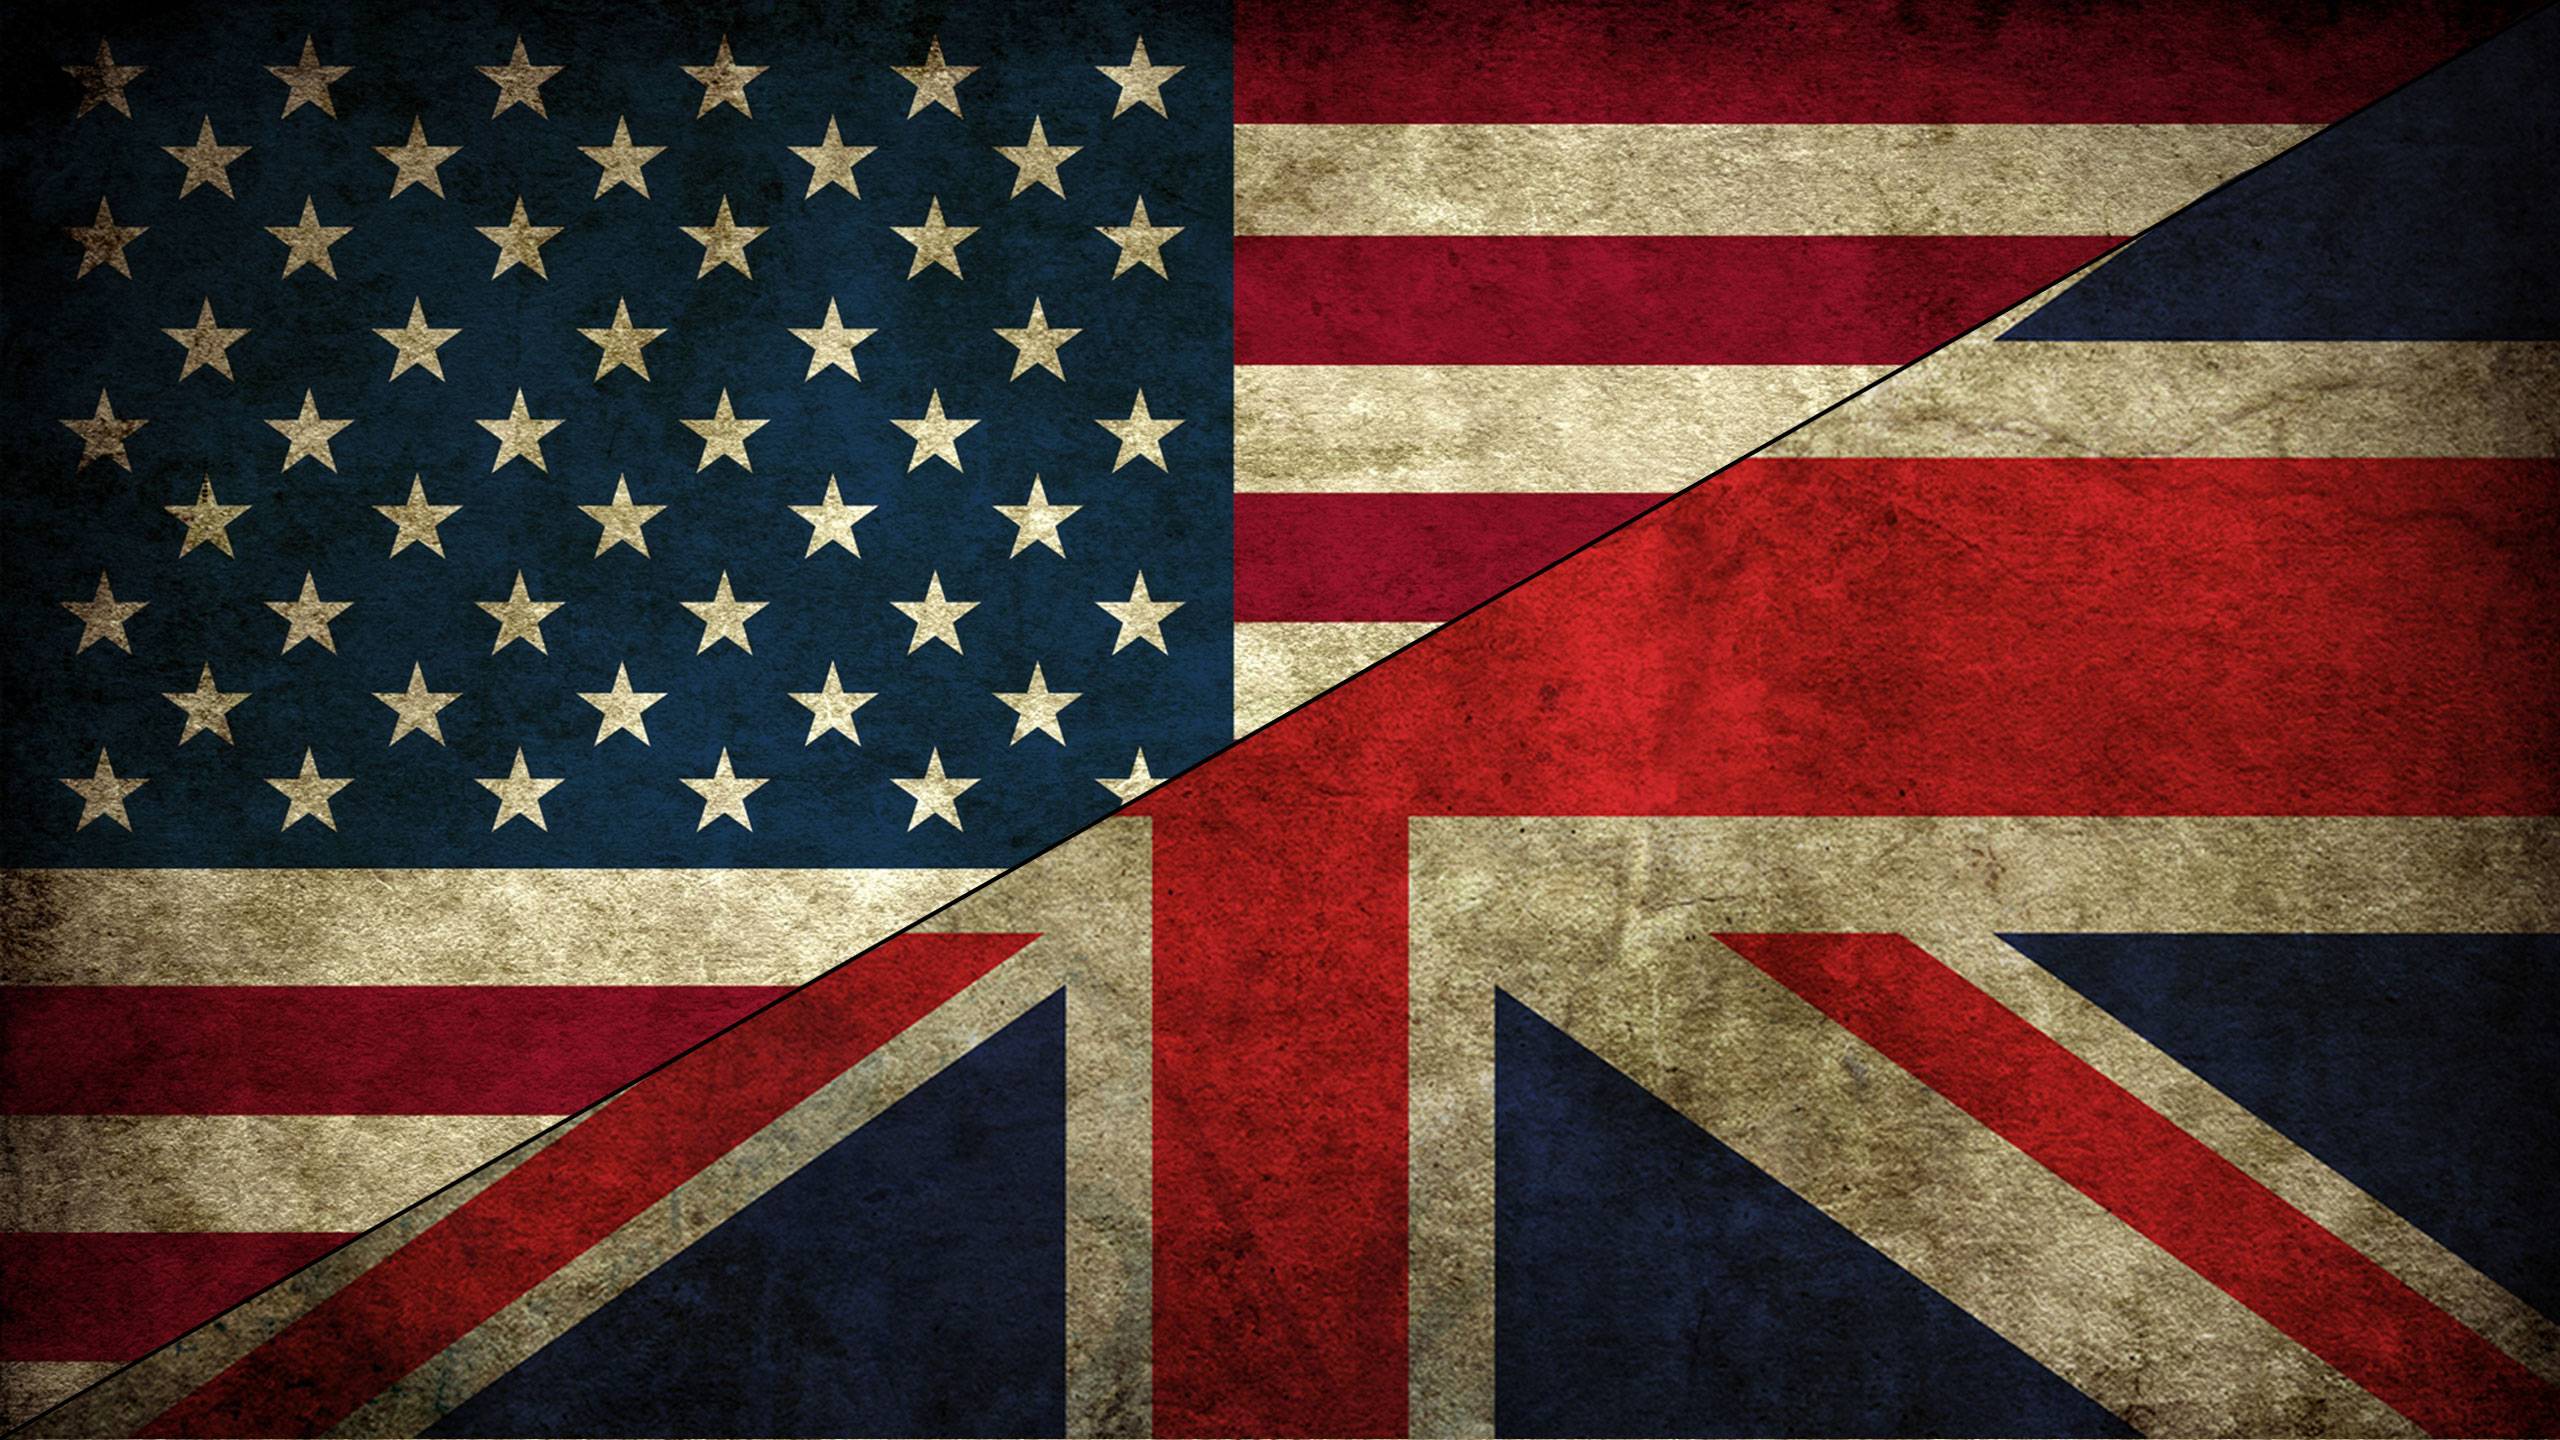 Social Media: The Differences Between a U.S. & UK Audience